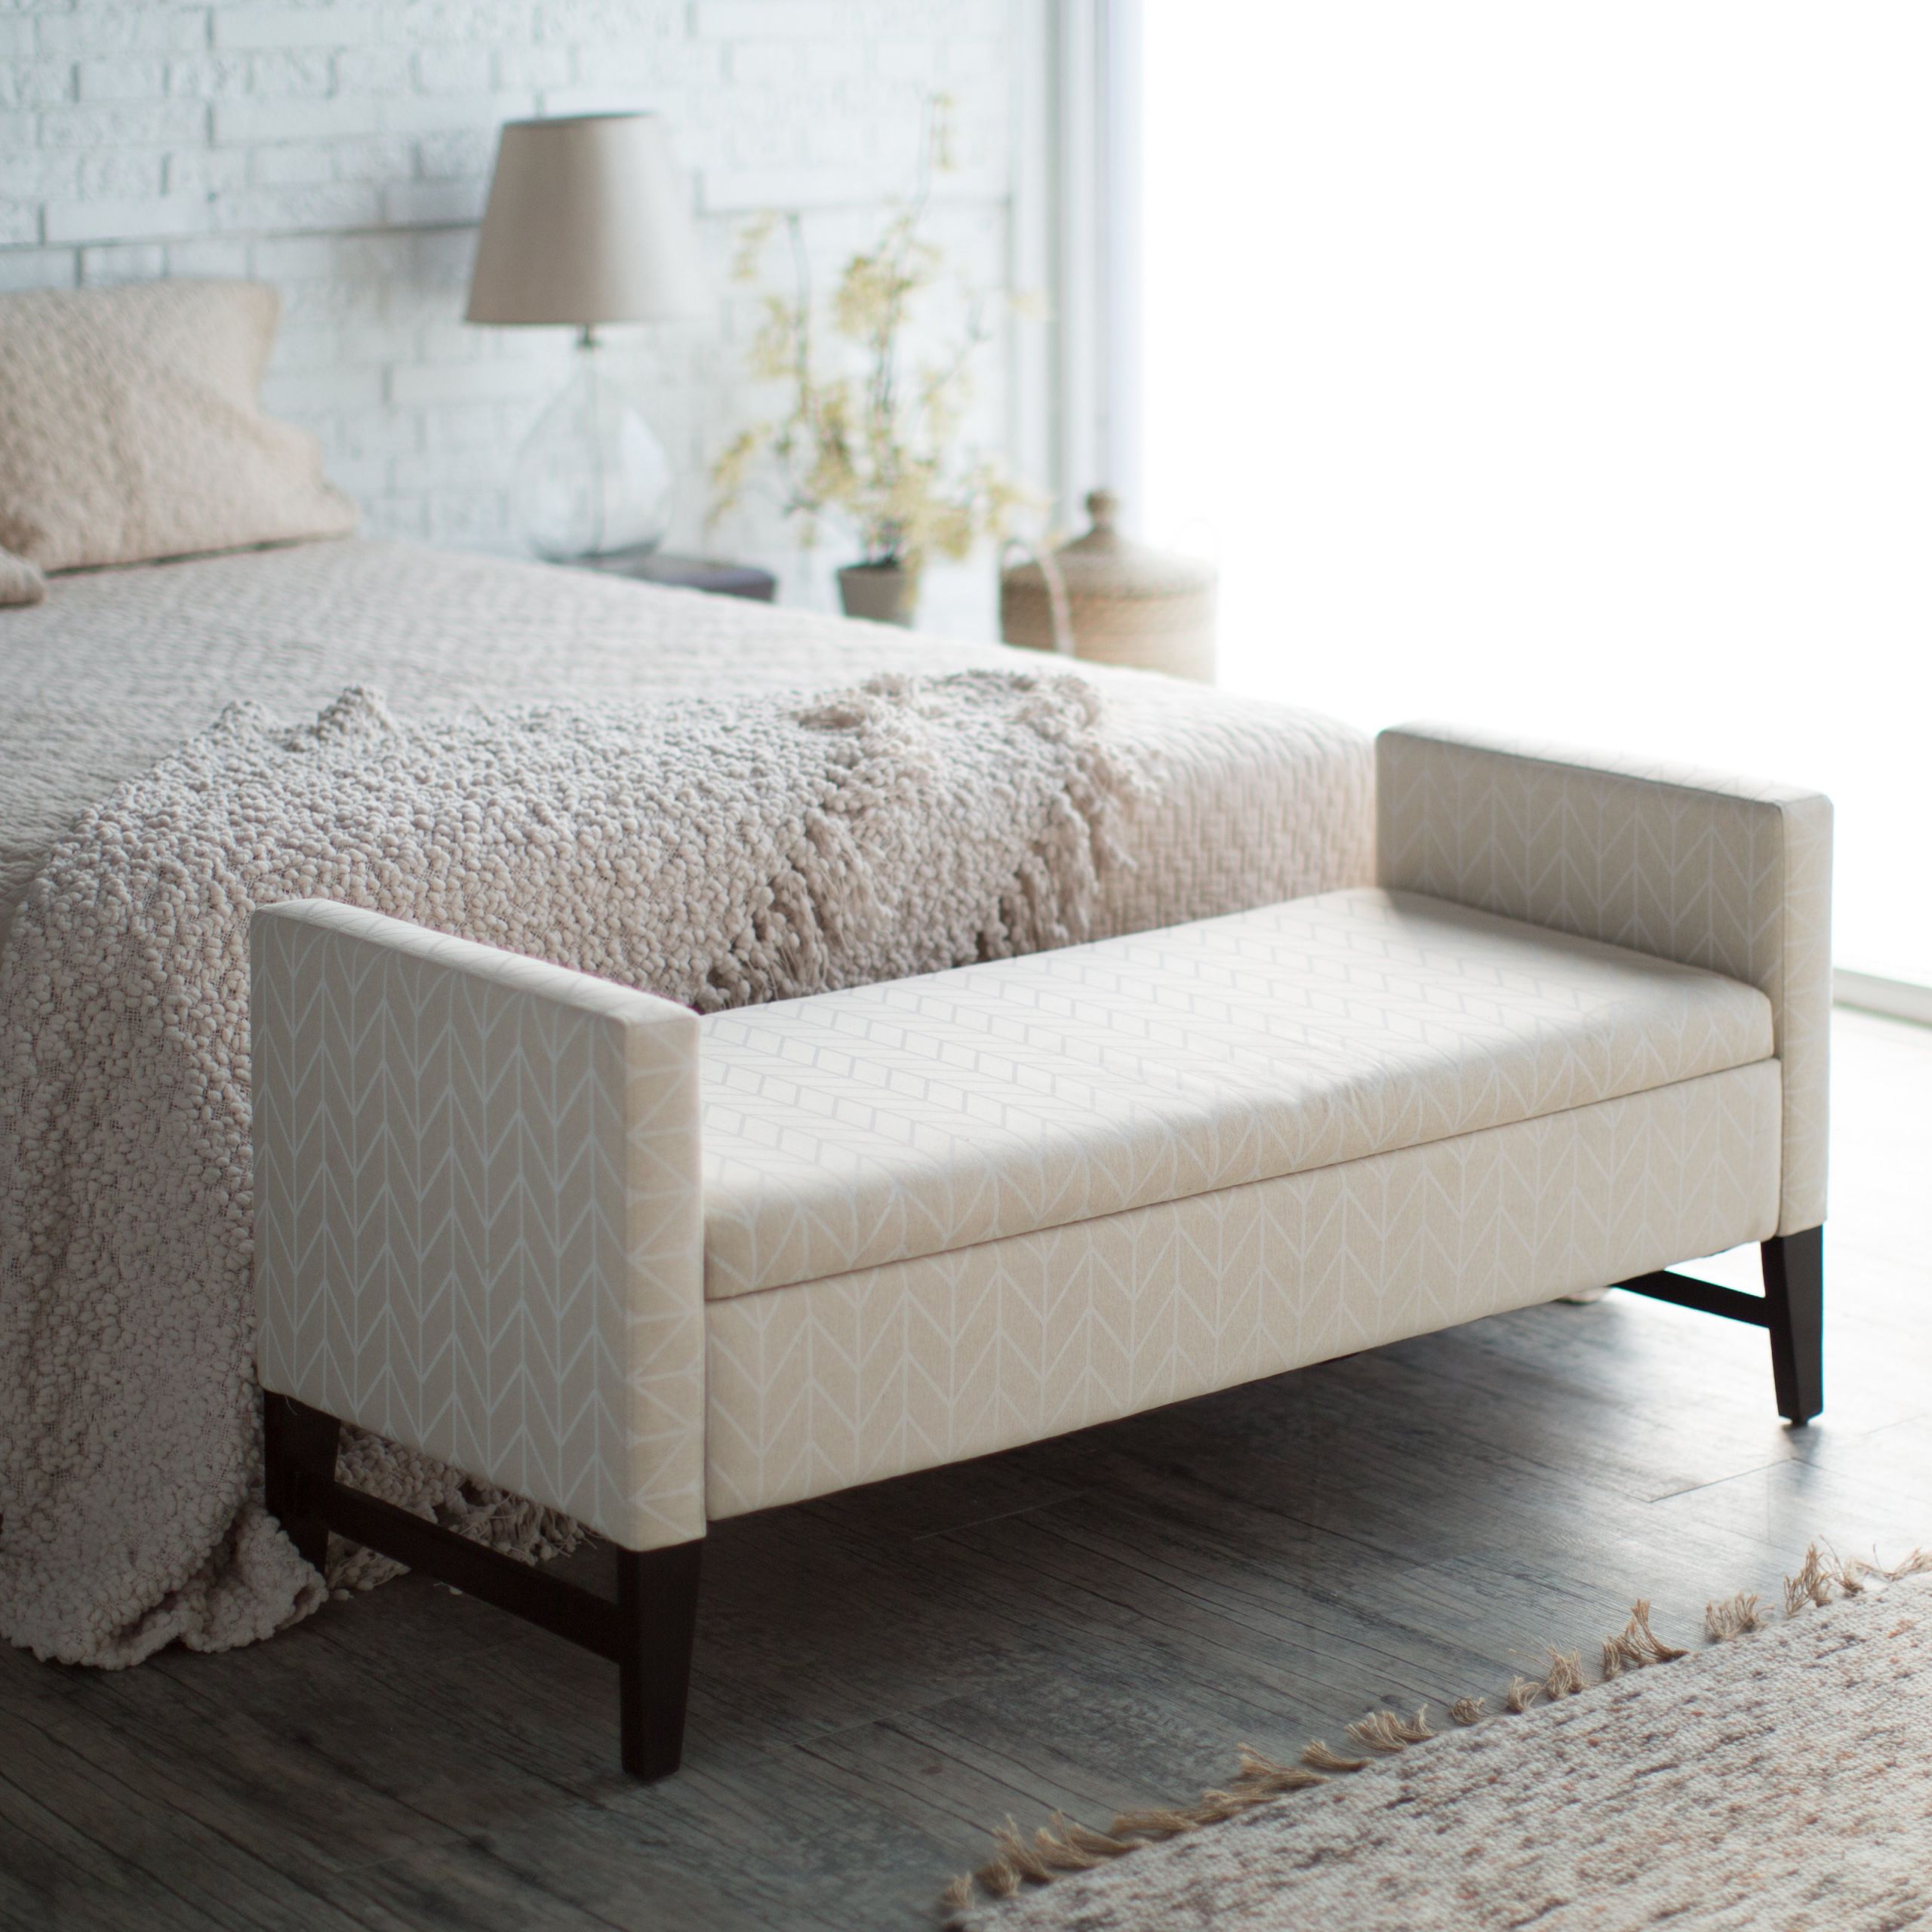 Bed Bench Storage
 Perfect End of Bed Storage Bench – HomesFeed